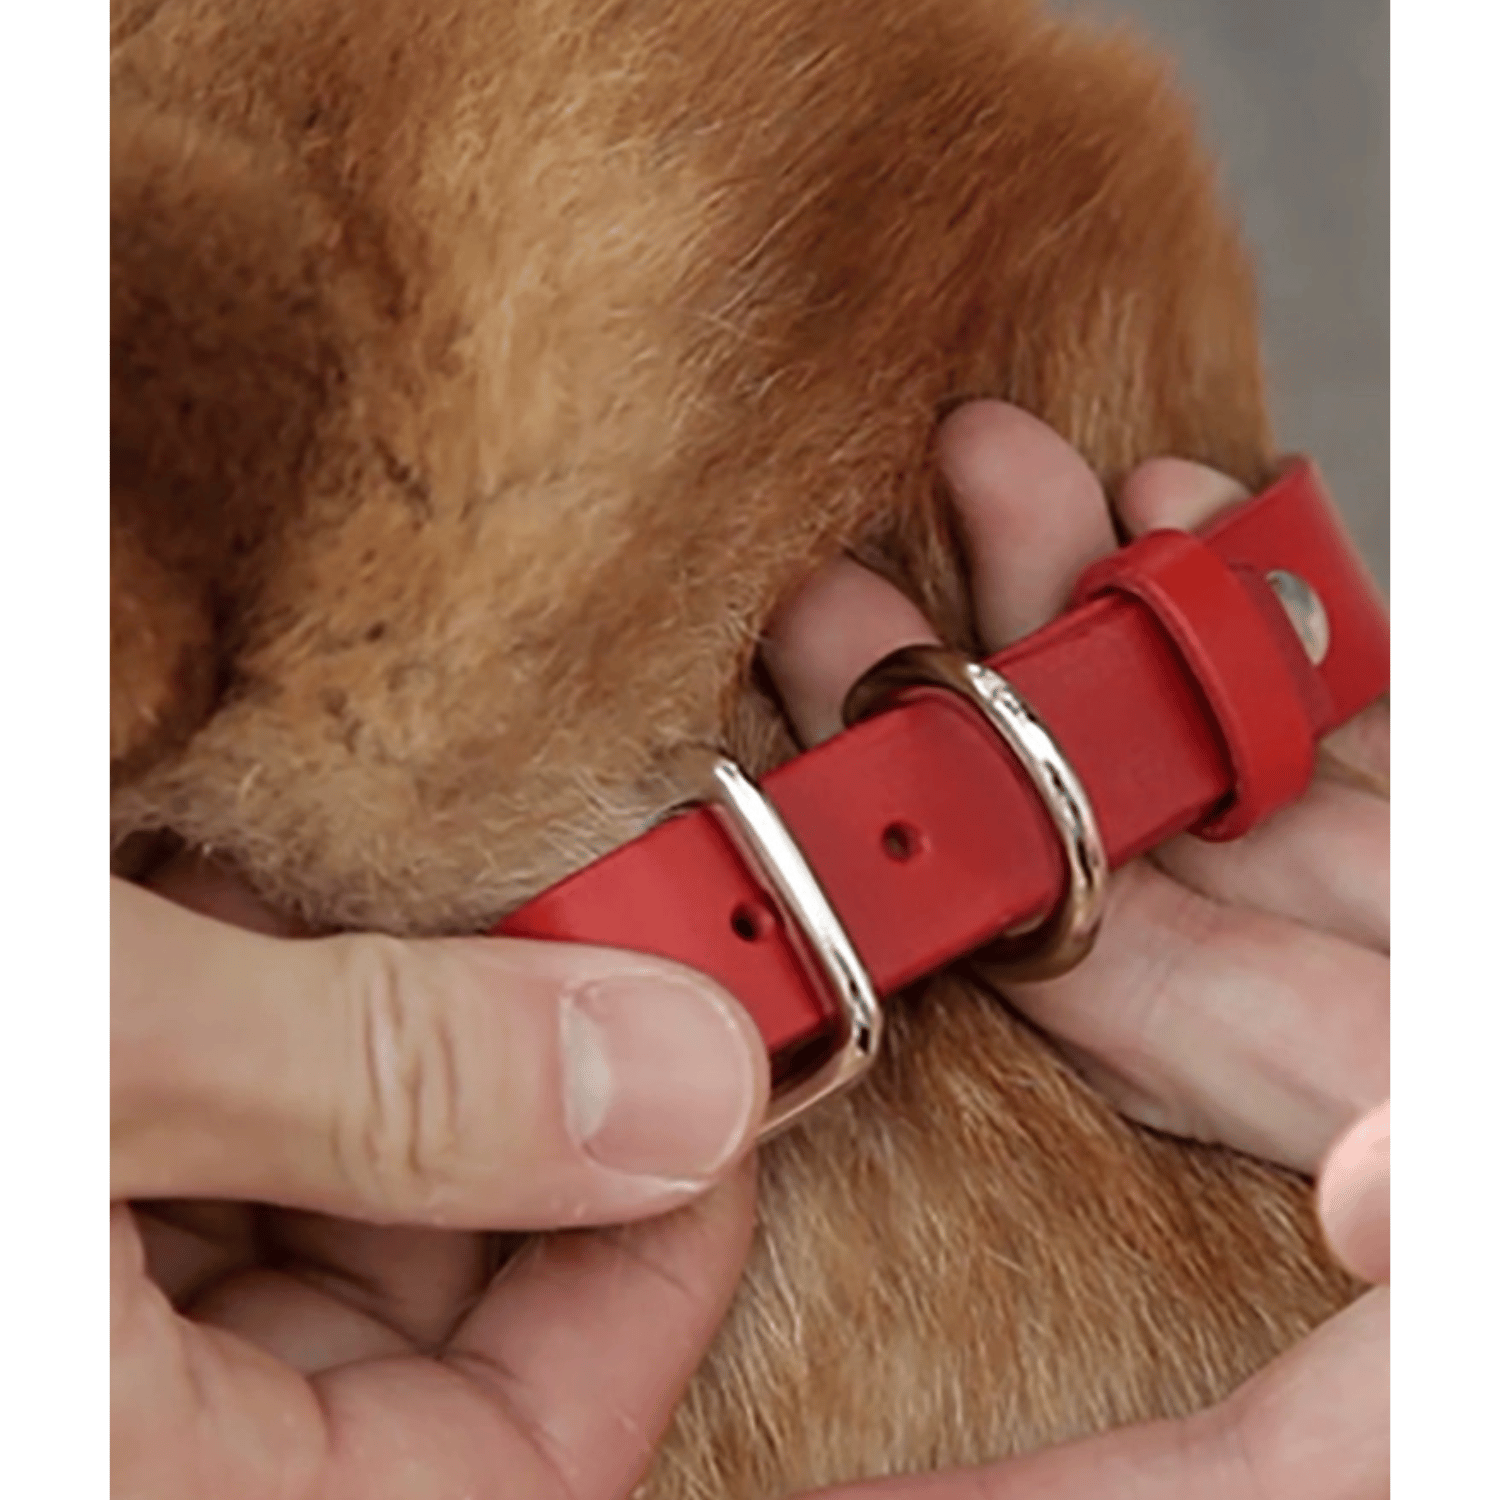 Shiba Inu wearing a Red Smooth Calfskin Leather Dog Collar, highlighting its vibrant color and stylish fit.